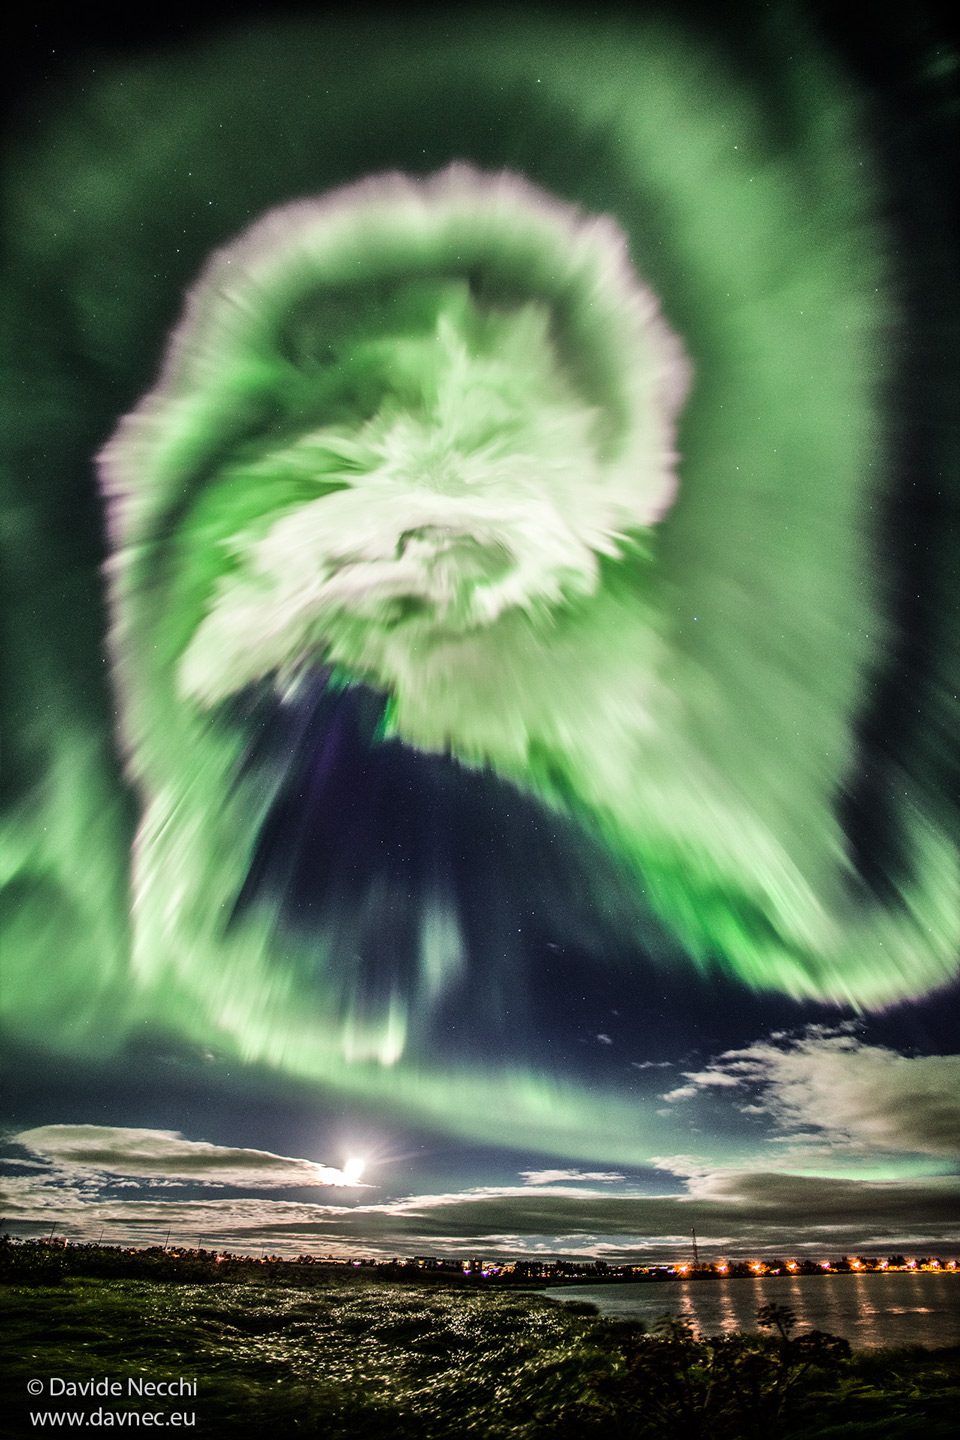 The picture shows a dramatic spiral-shaped aurora
over Iceland.
Please see the explanation for more detailed information.